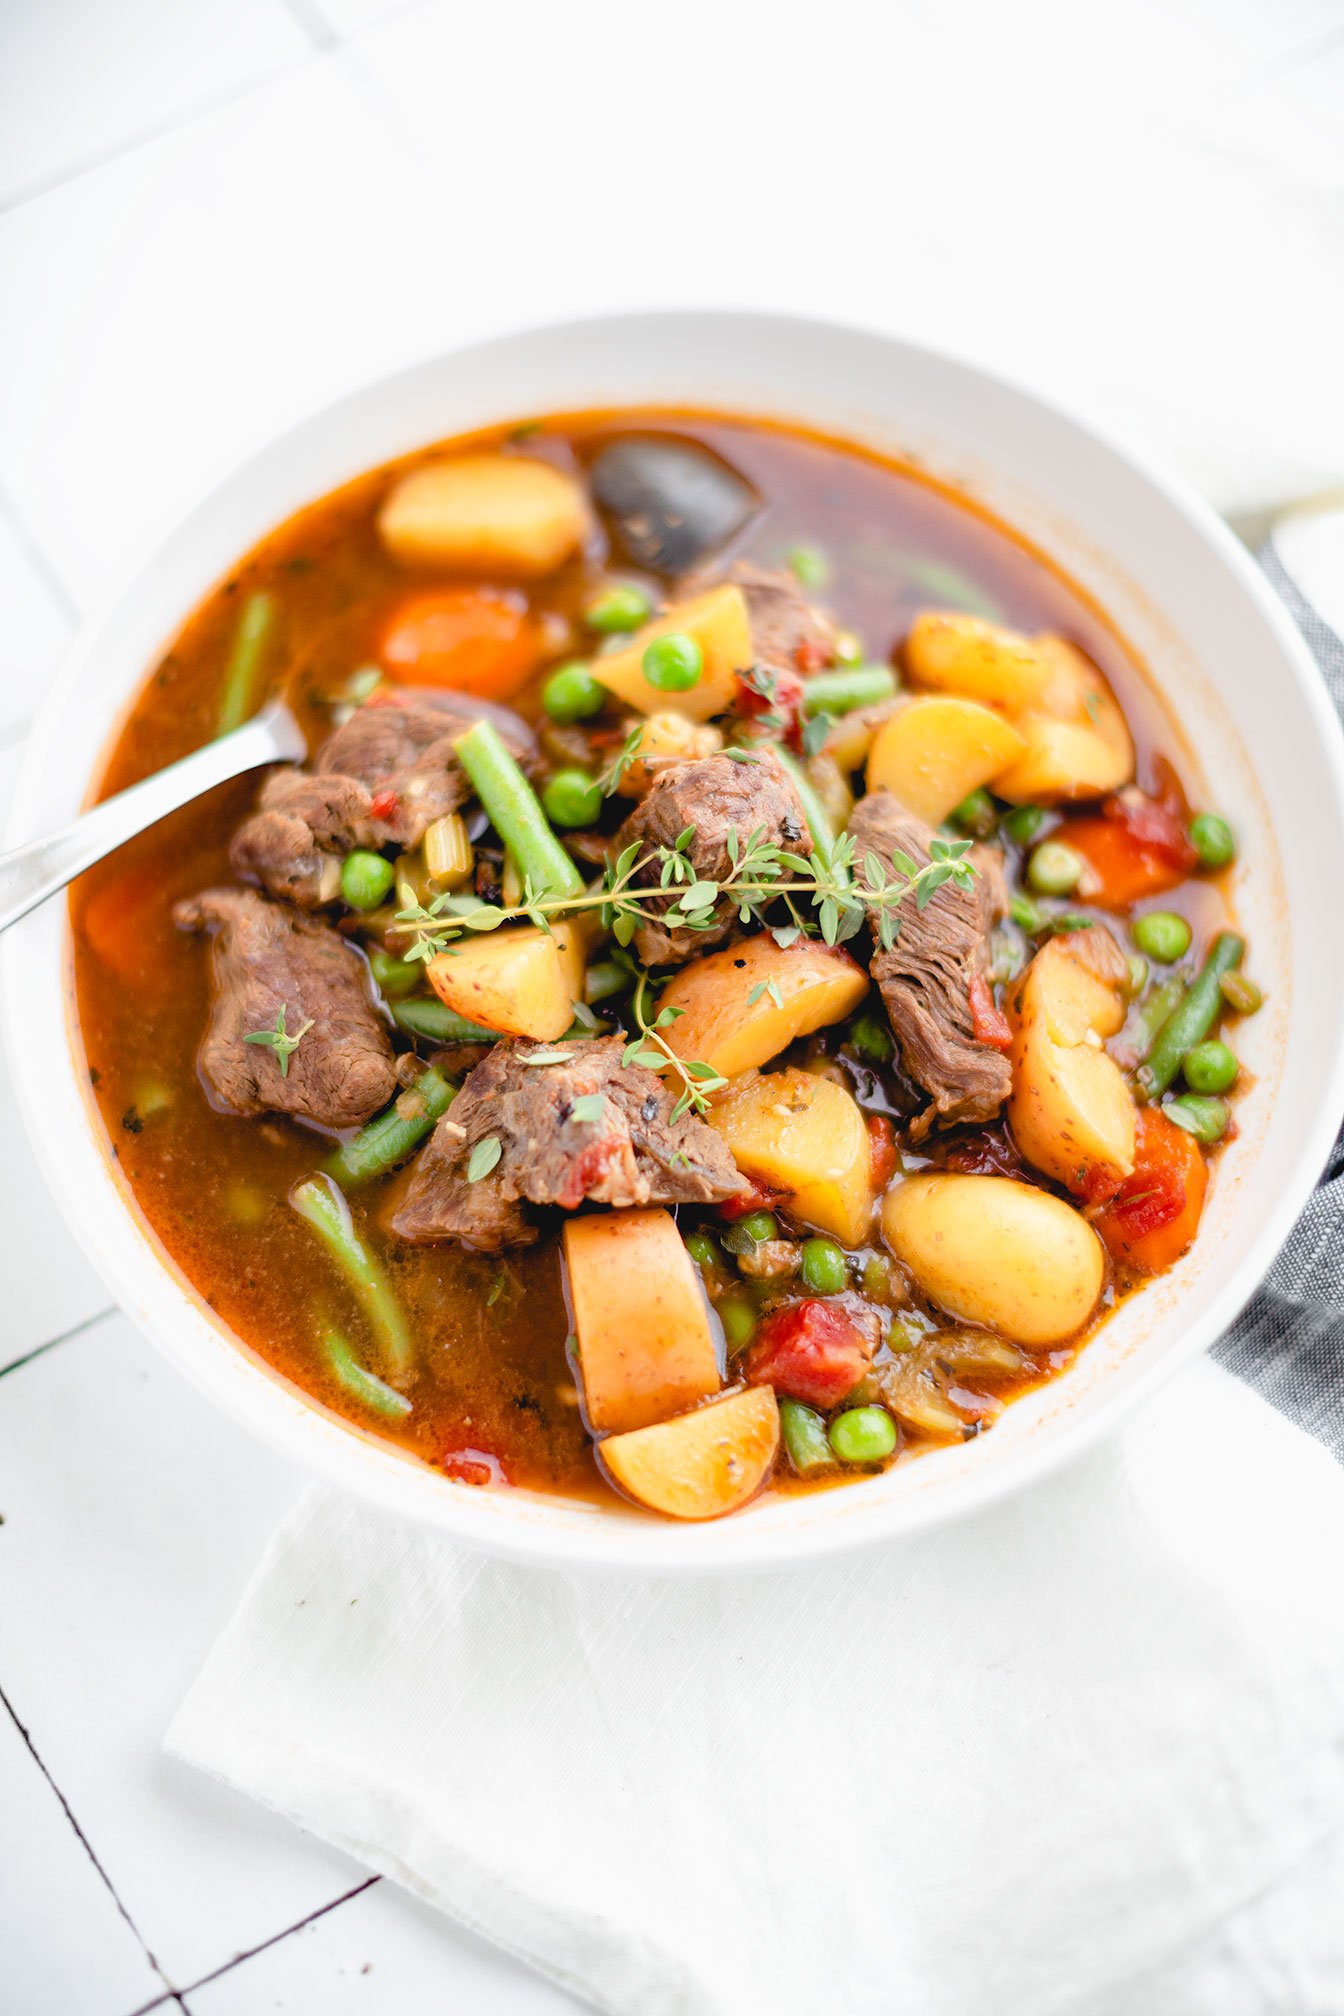 Harvest Hearty Beef Stew